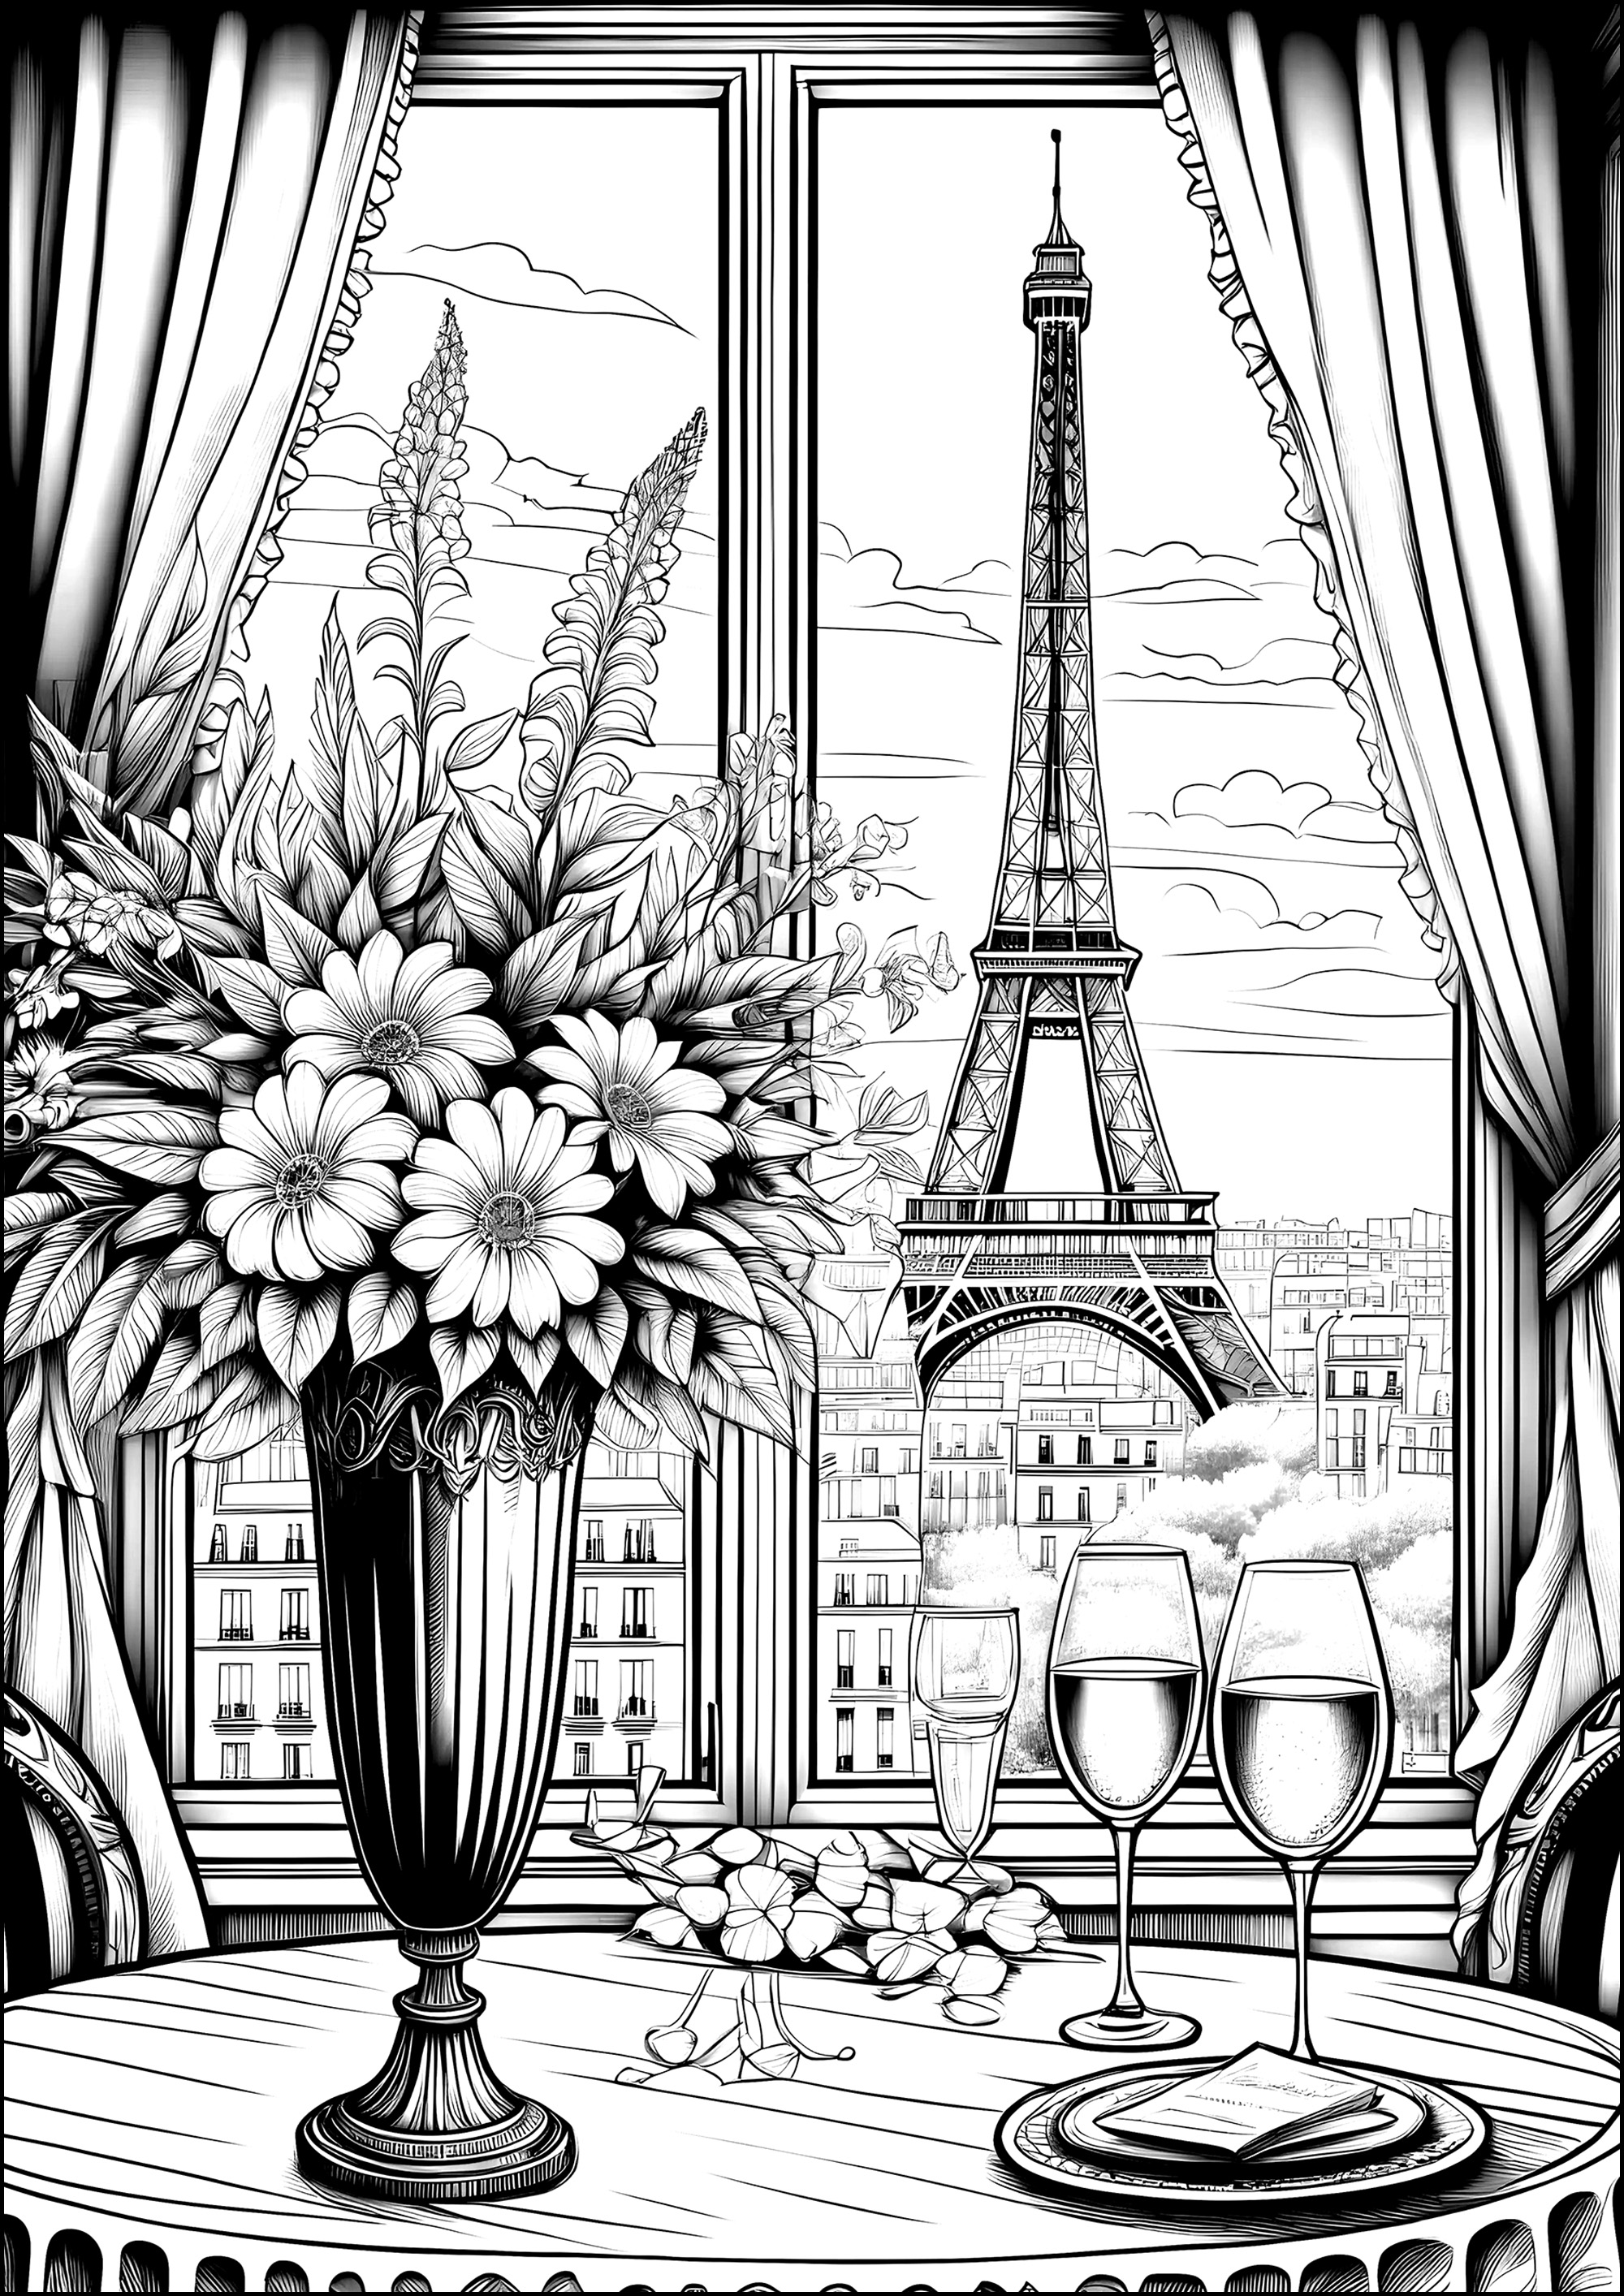 Window on Paris: Champagne and the Eiffel Tower. Clink glasses of champagne in front of a window overlooking the Eiffel Tower